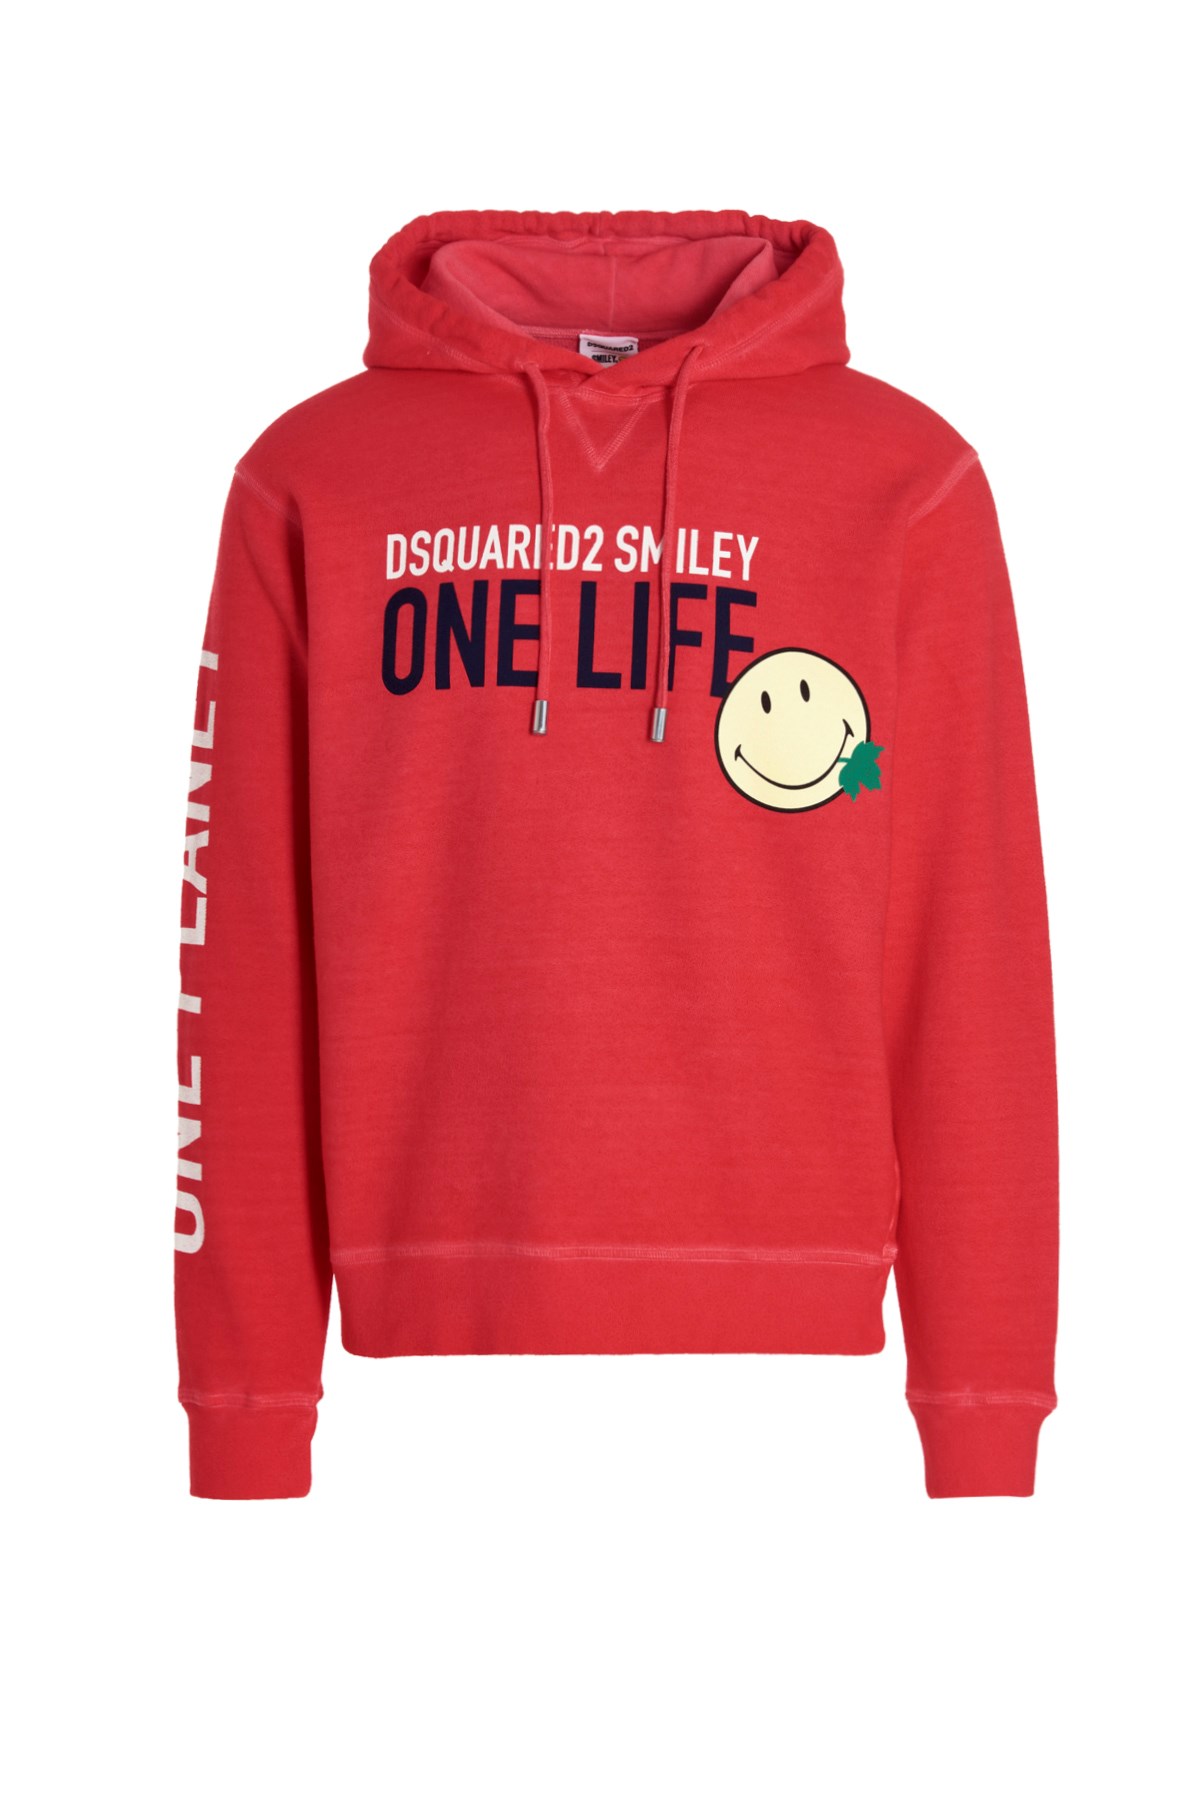 DSQUARED2 Hoodie 'One Life One Planet Smiley'